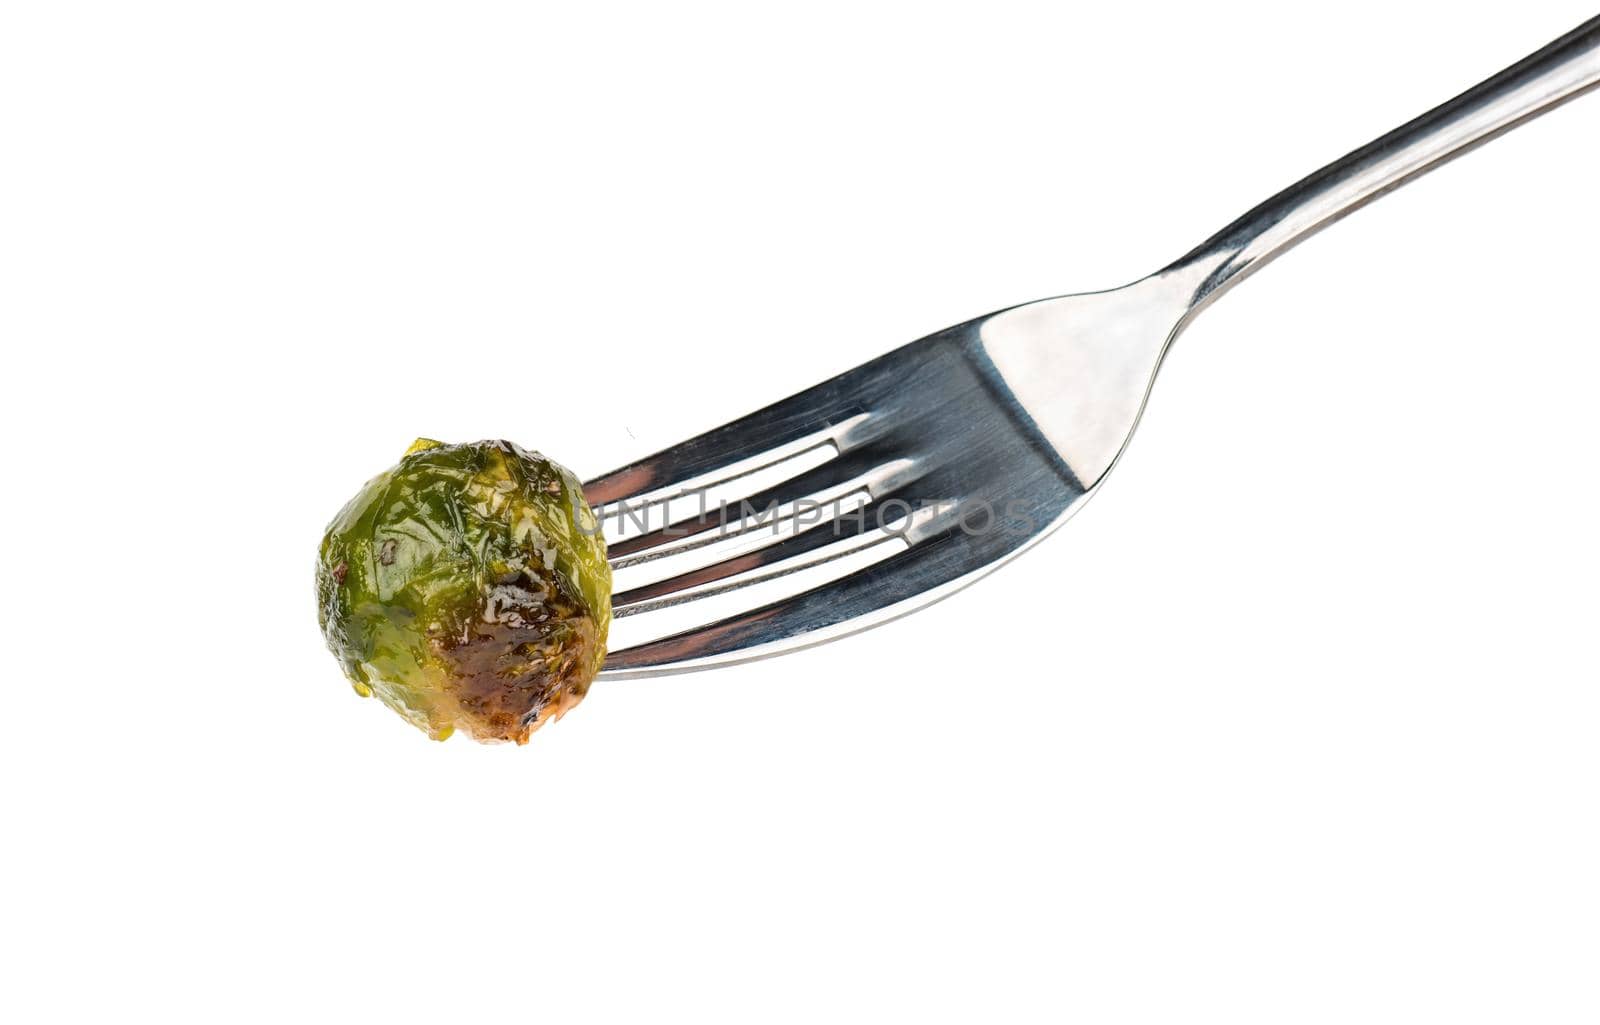 Fried brussels sprouts on fork isolated on a white background